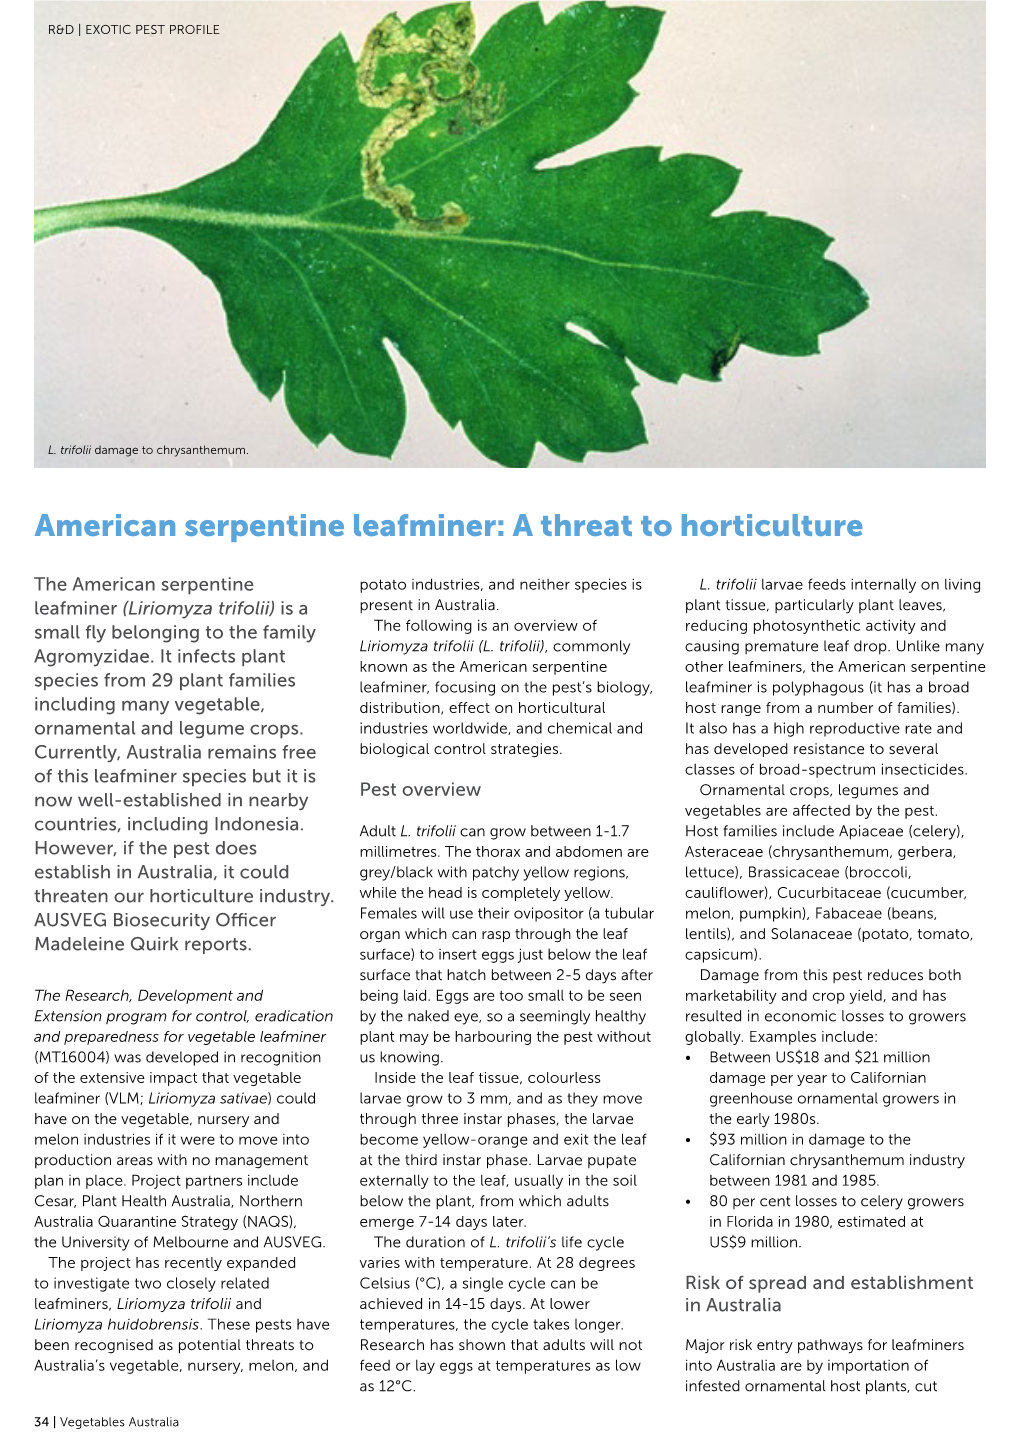 American Serpentine Leafminer: a Threat to Horticulture